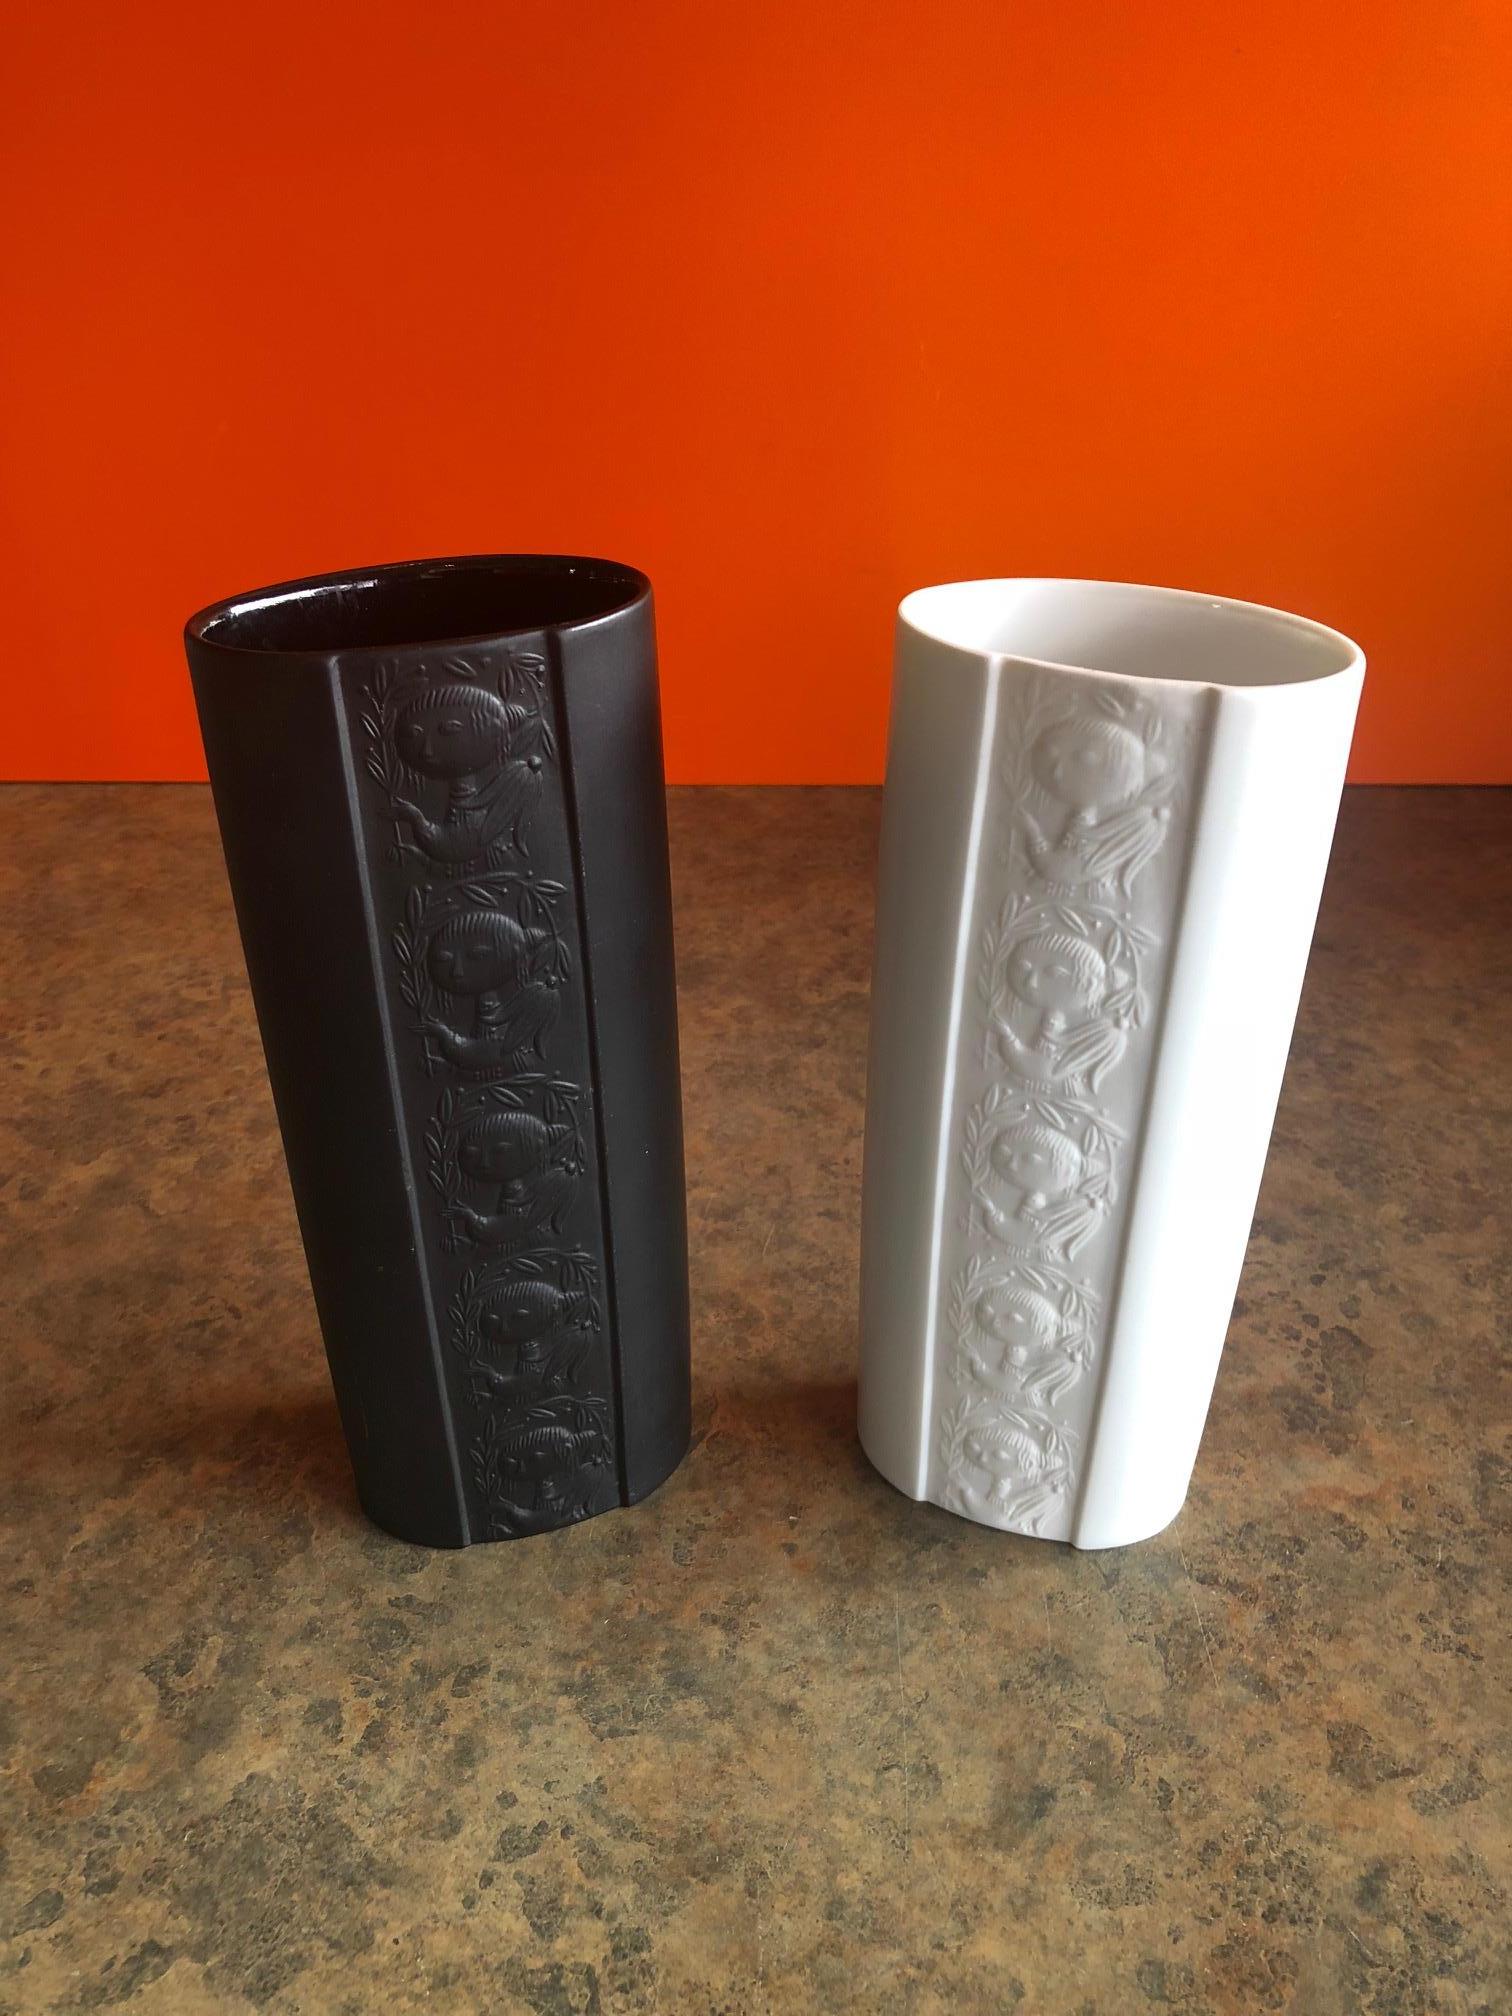 A pair of midcentury papagena vases by Danish artist-cum-designer Bjorn Wiinblad for Rosenthal of Germany as part of their extensive artist-led Studio Line series, circa 1970s.  #547

The vases are white and black porcelain with a matte finish in